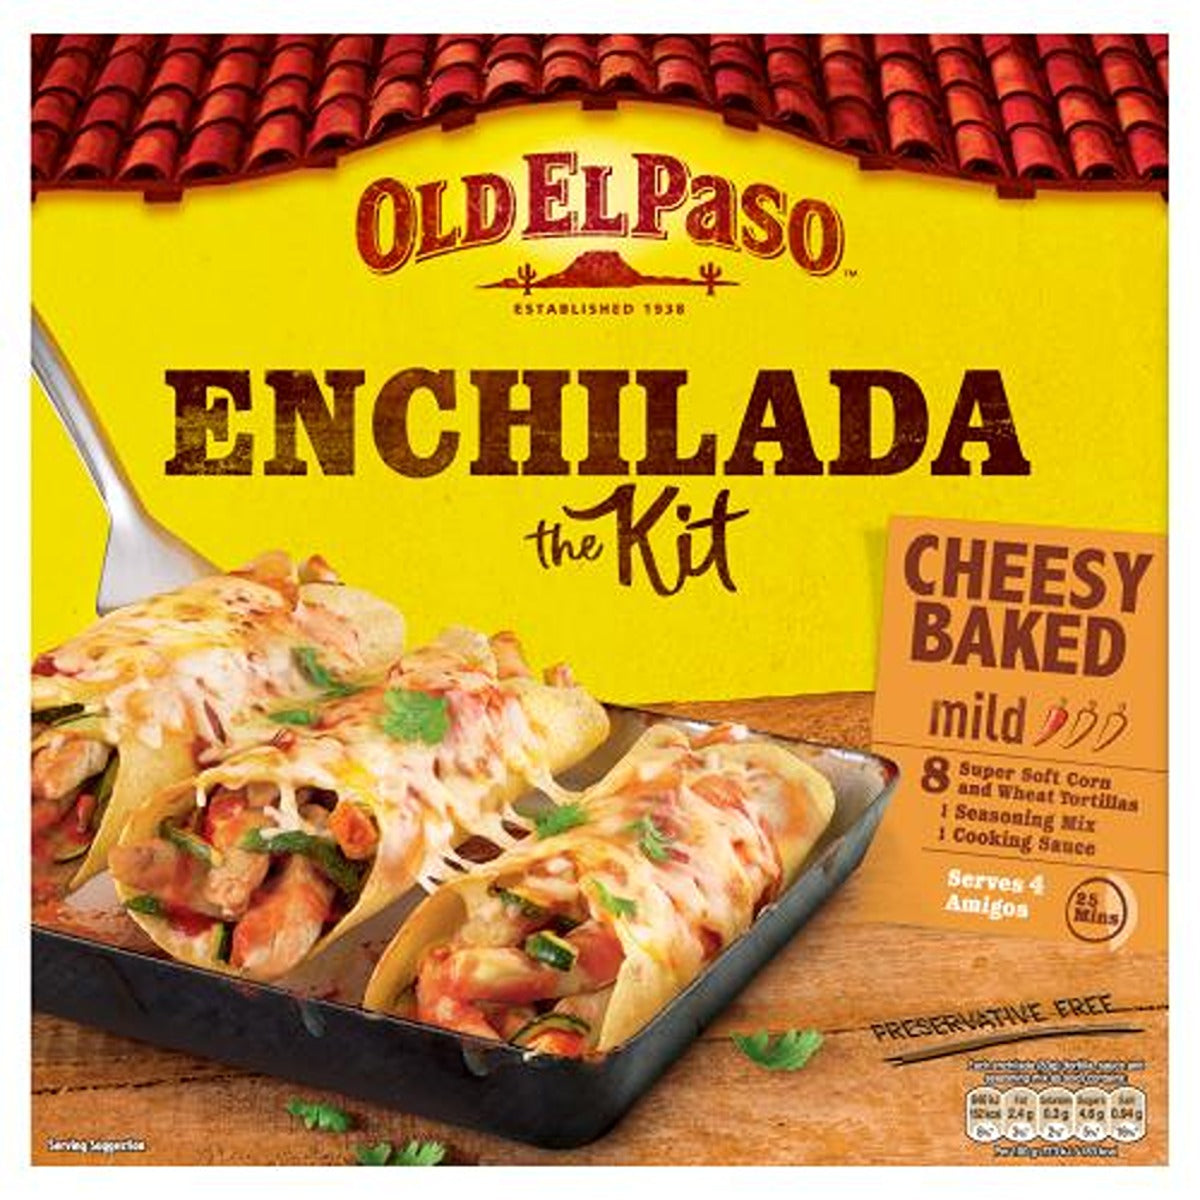 Old El Paso - Cheesy Baked Enchilada Kit - 663g - Continental Food Store